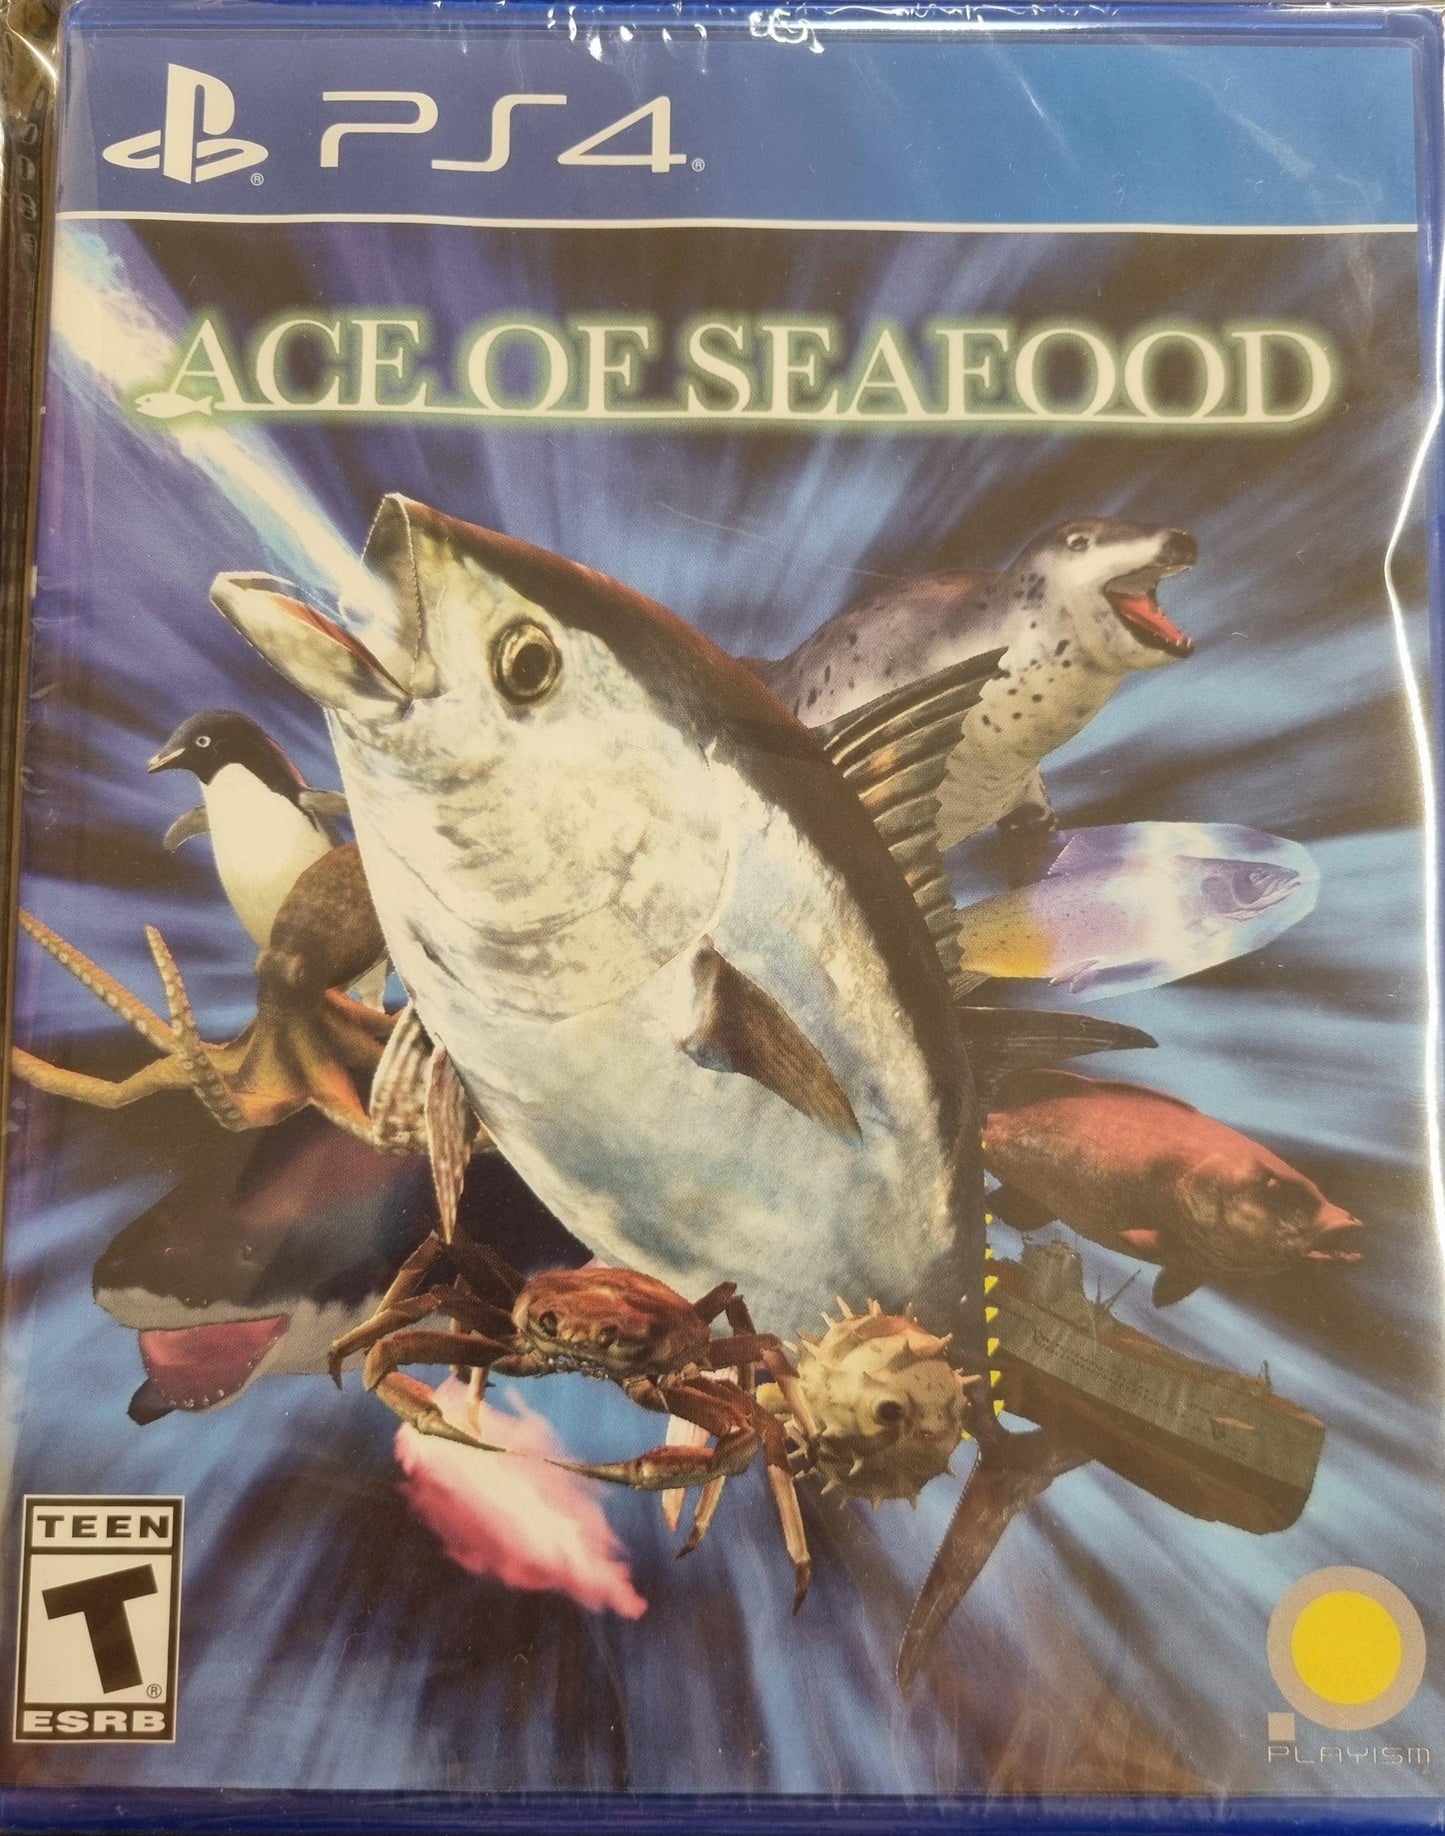 Ace of Seafood (Forseglet) - ZZGames.dk